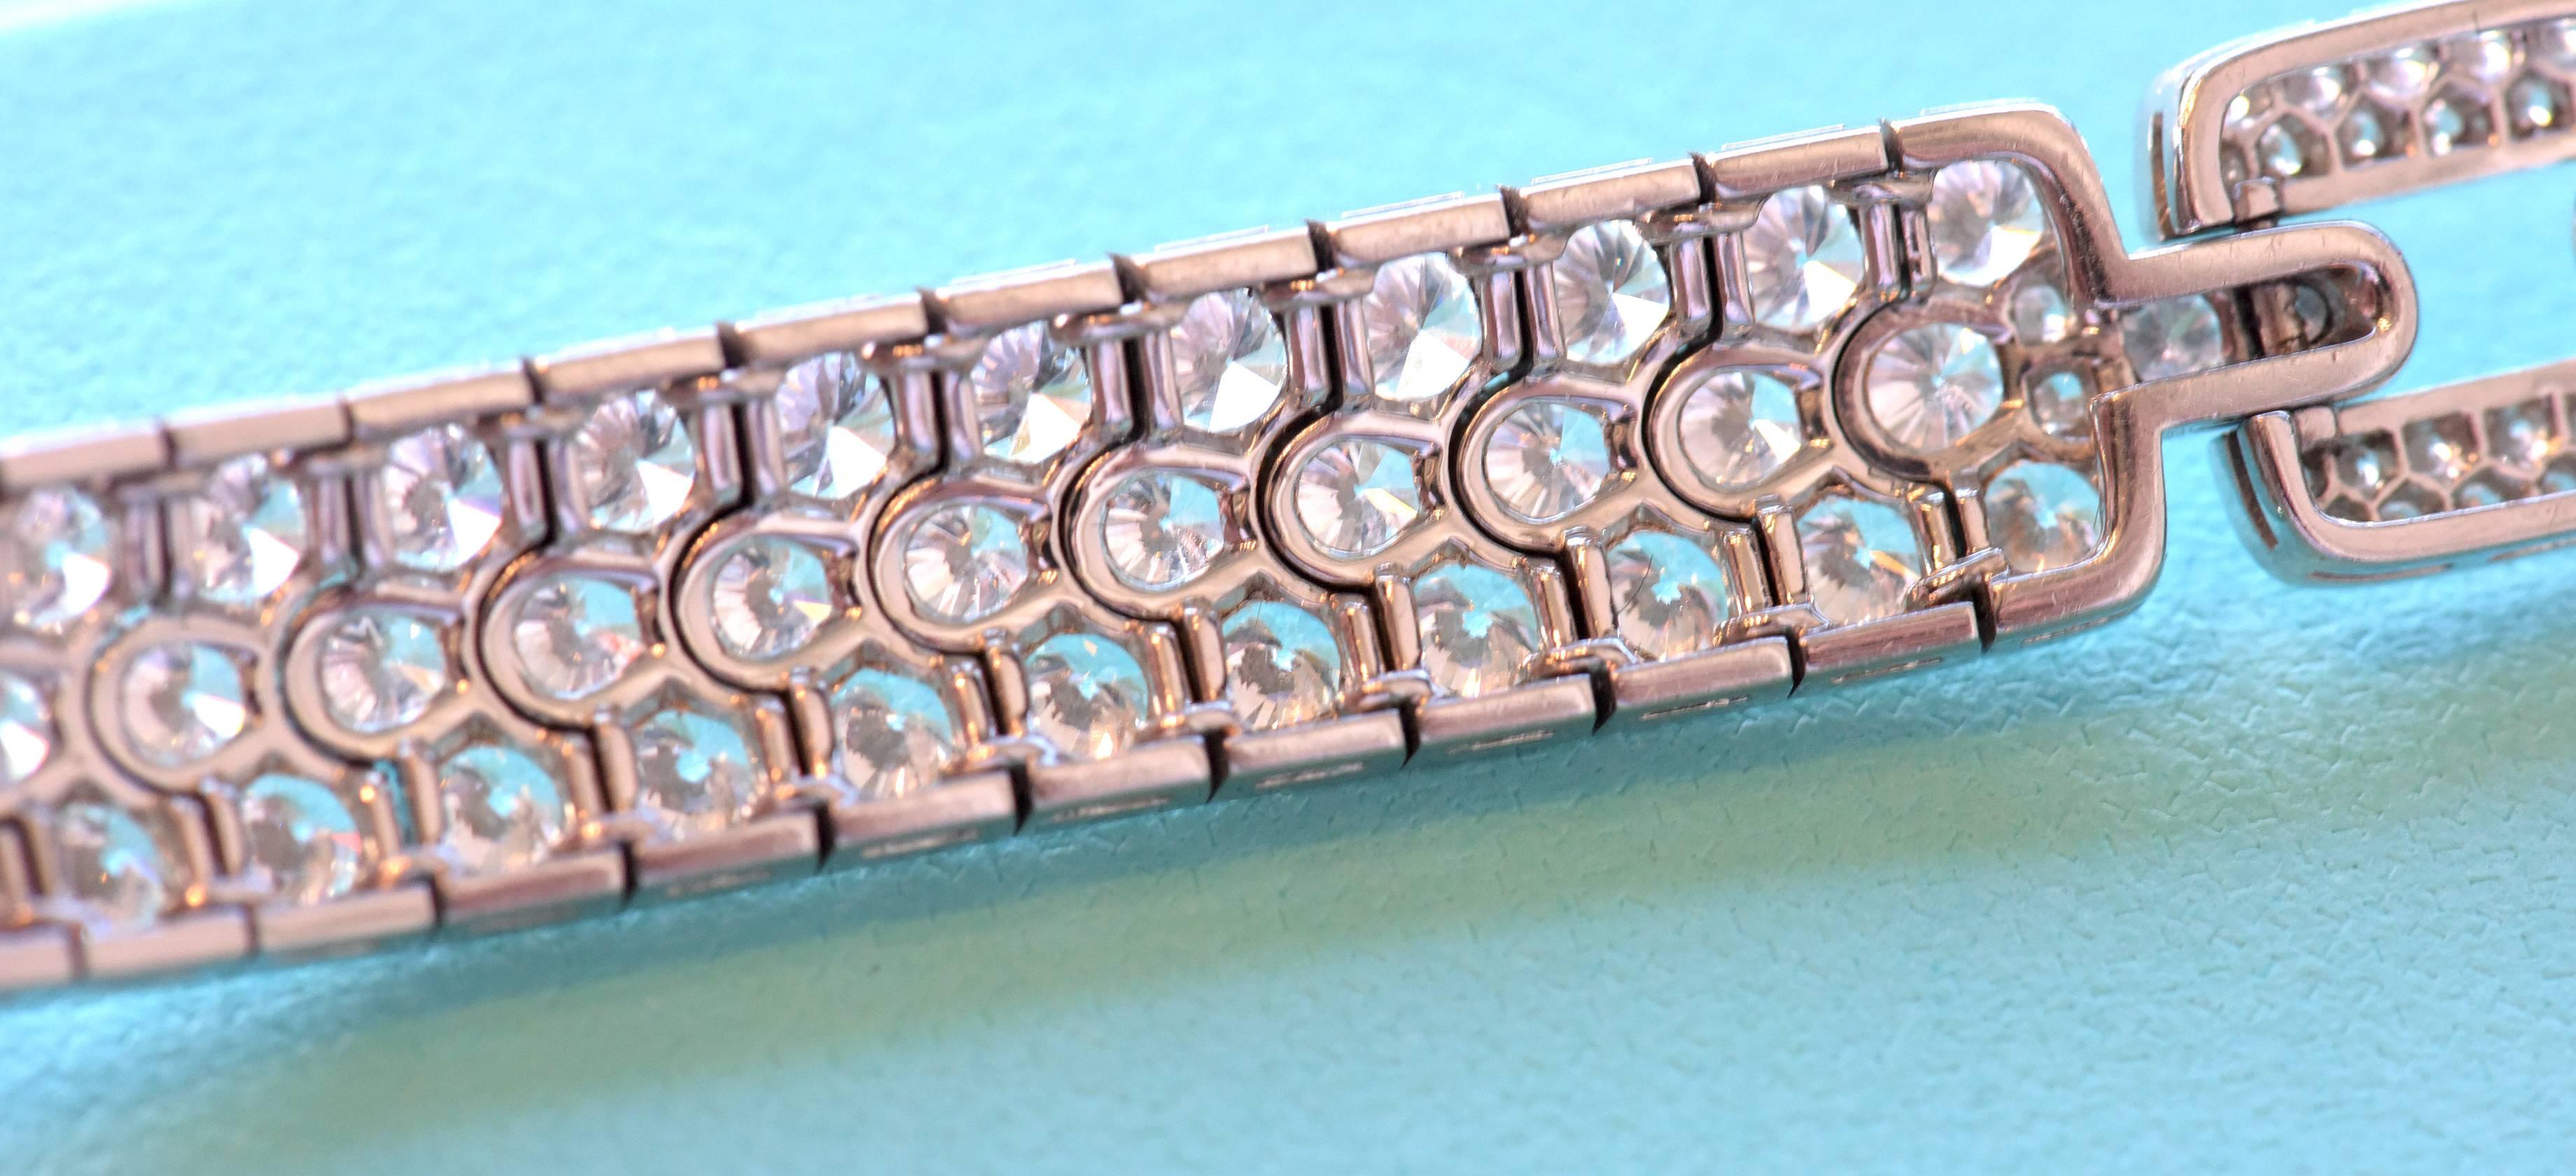 Estate of a lady; we offer an exceptional Tiffany & Co. Diamond & Platinum Bracelet. Set with approximately 17.40 Carats of Collection Quality Diamonds, Bead set in Three row sections with Three Bar Pave'd Links. Bracelet is complete with original